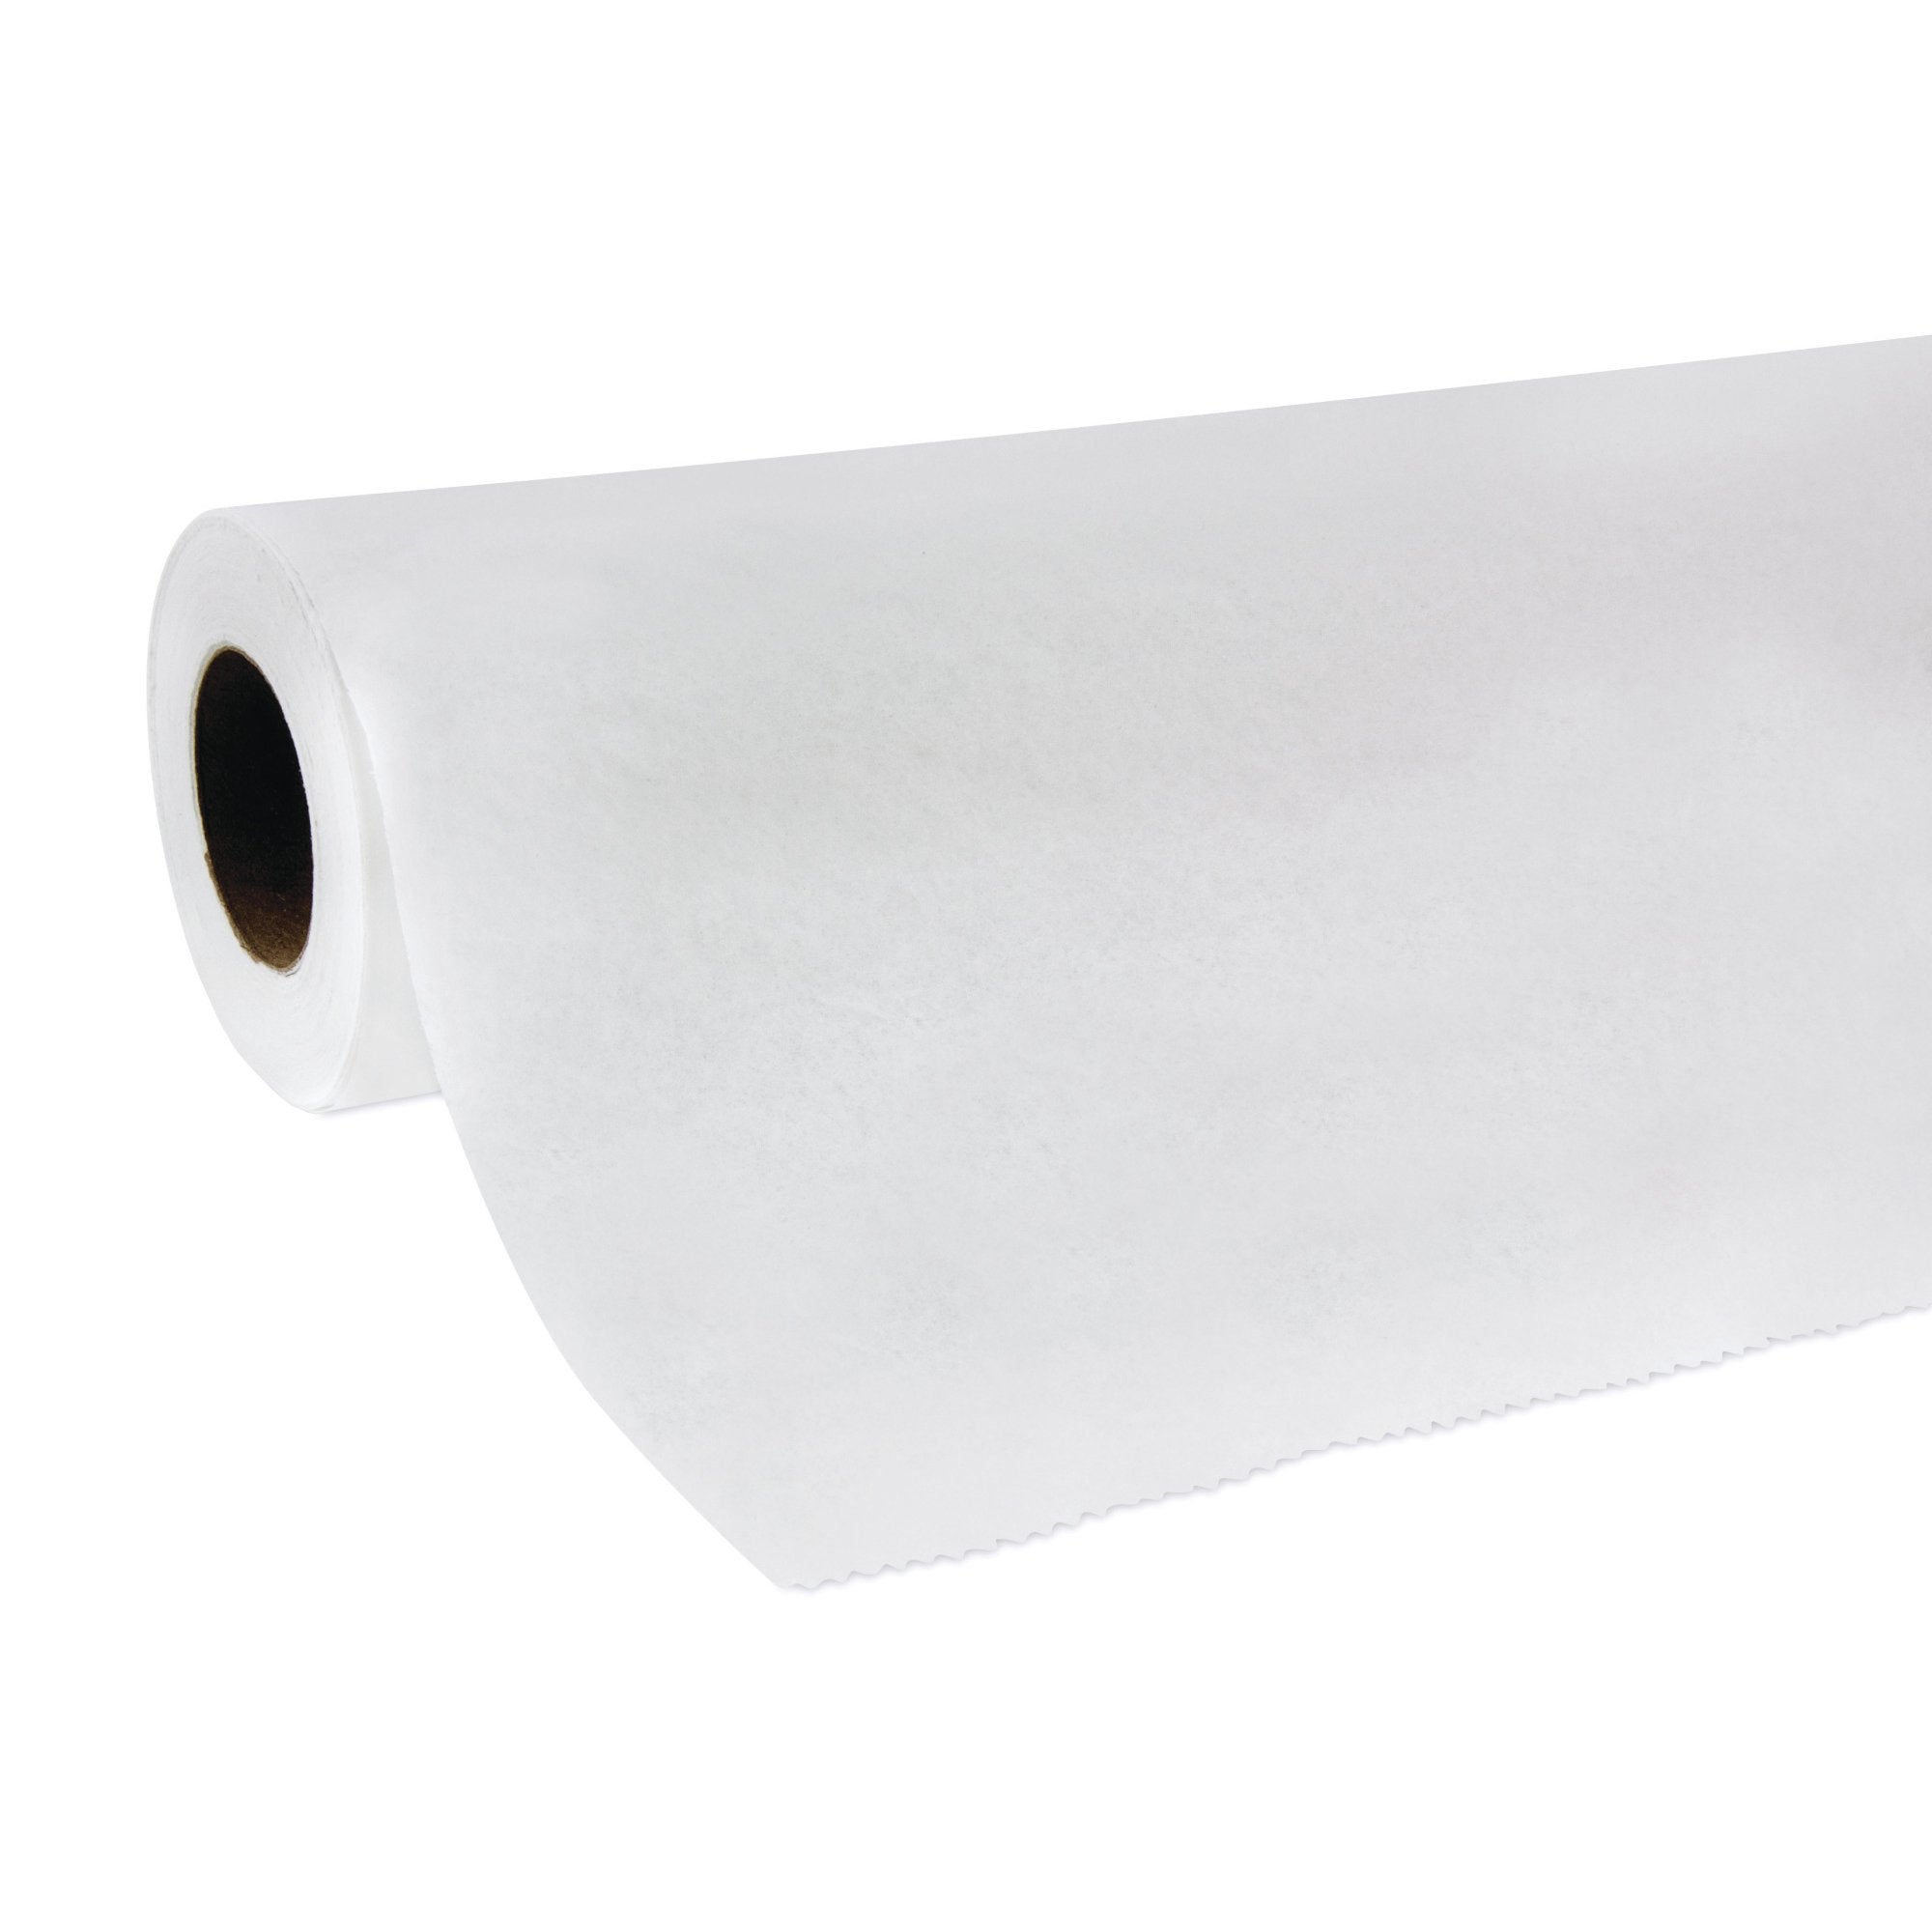 McKesson Crepe Table Paper, 21 Inch x 125 Foot, White | Part # 18-804 ...